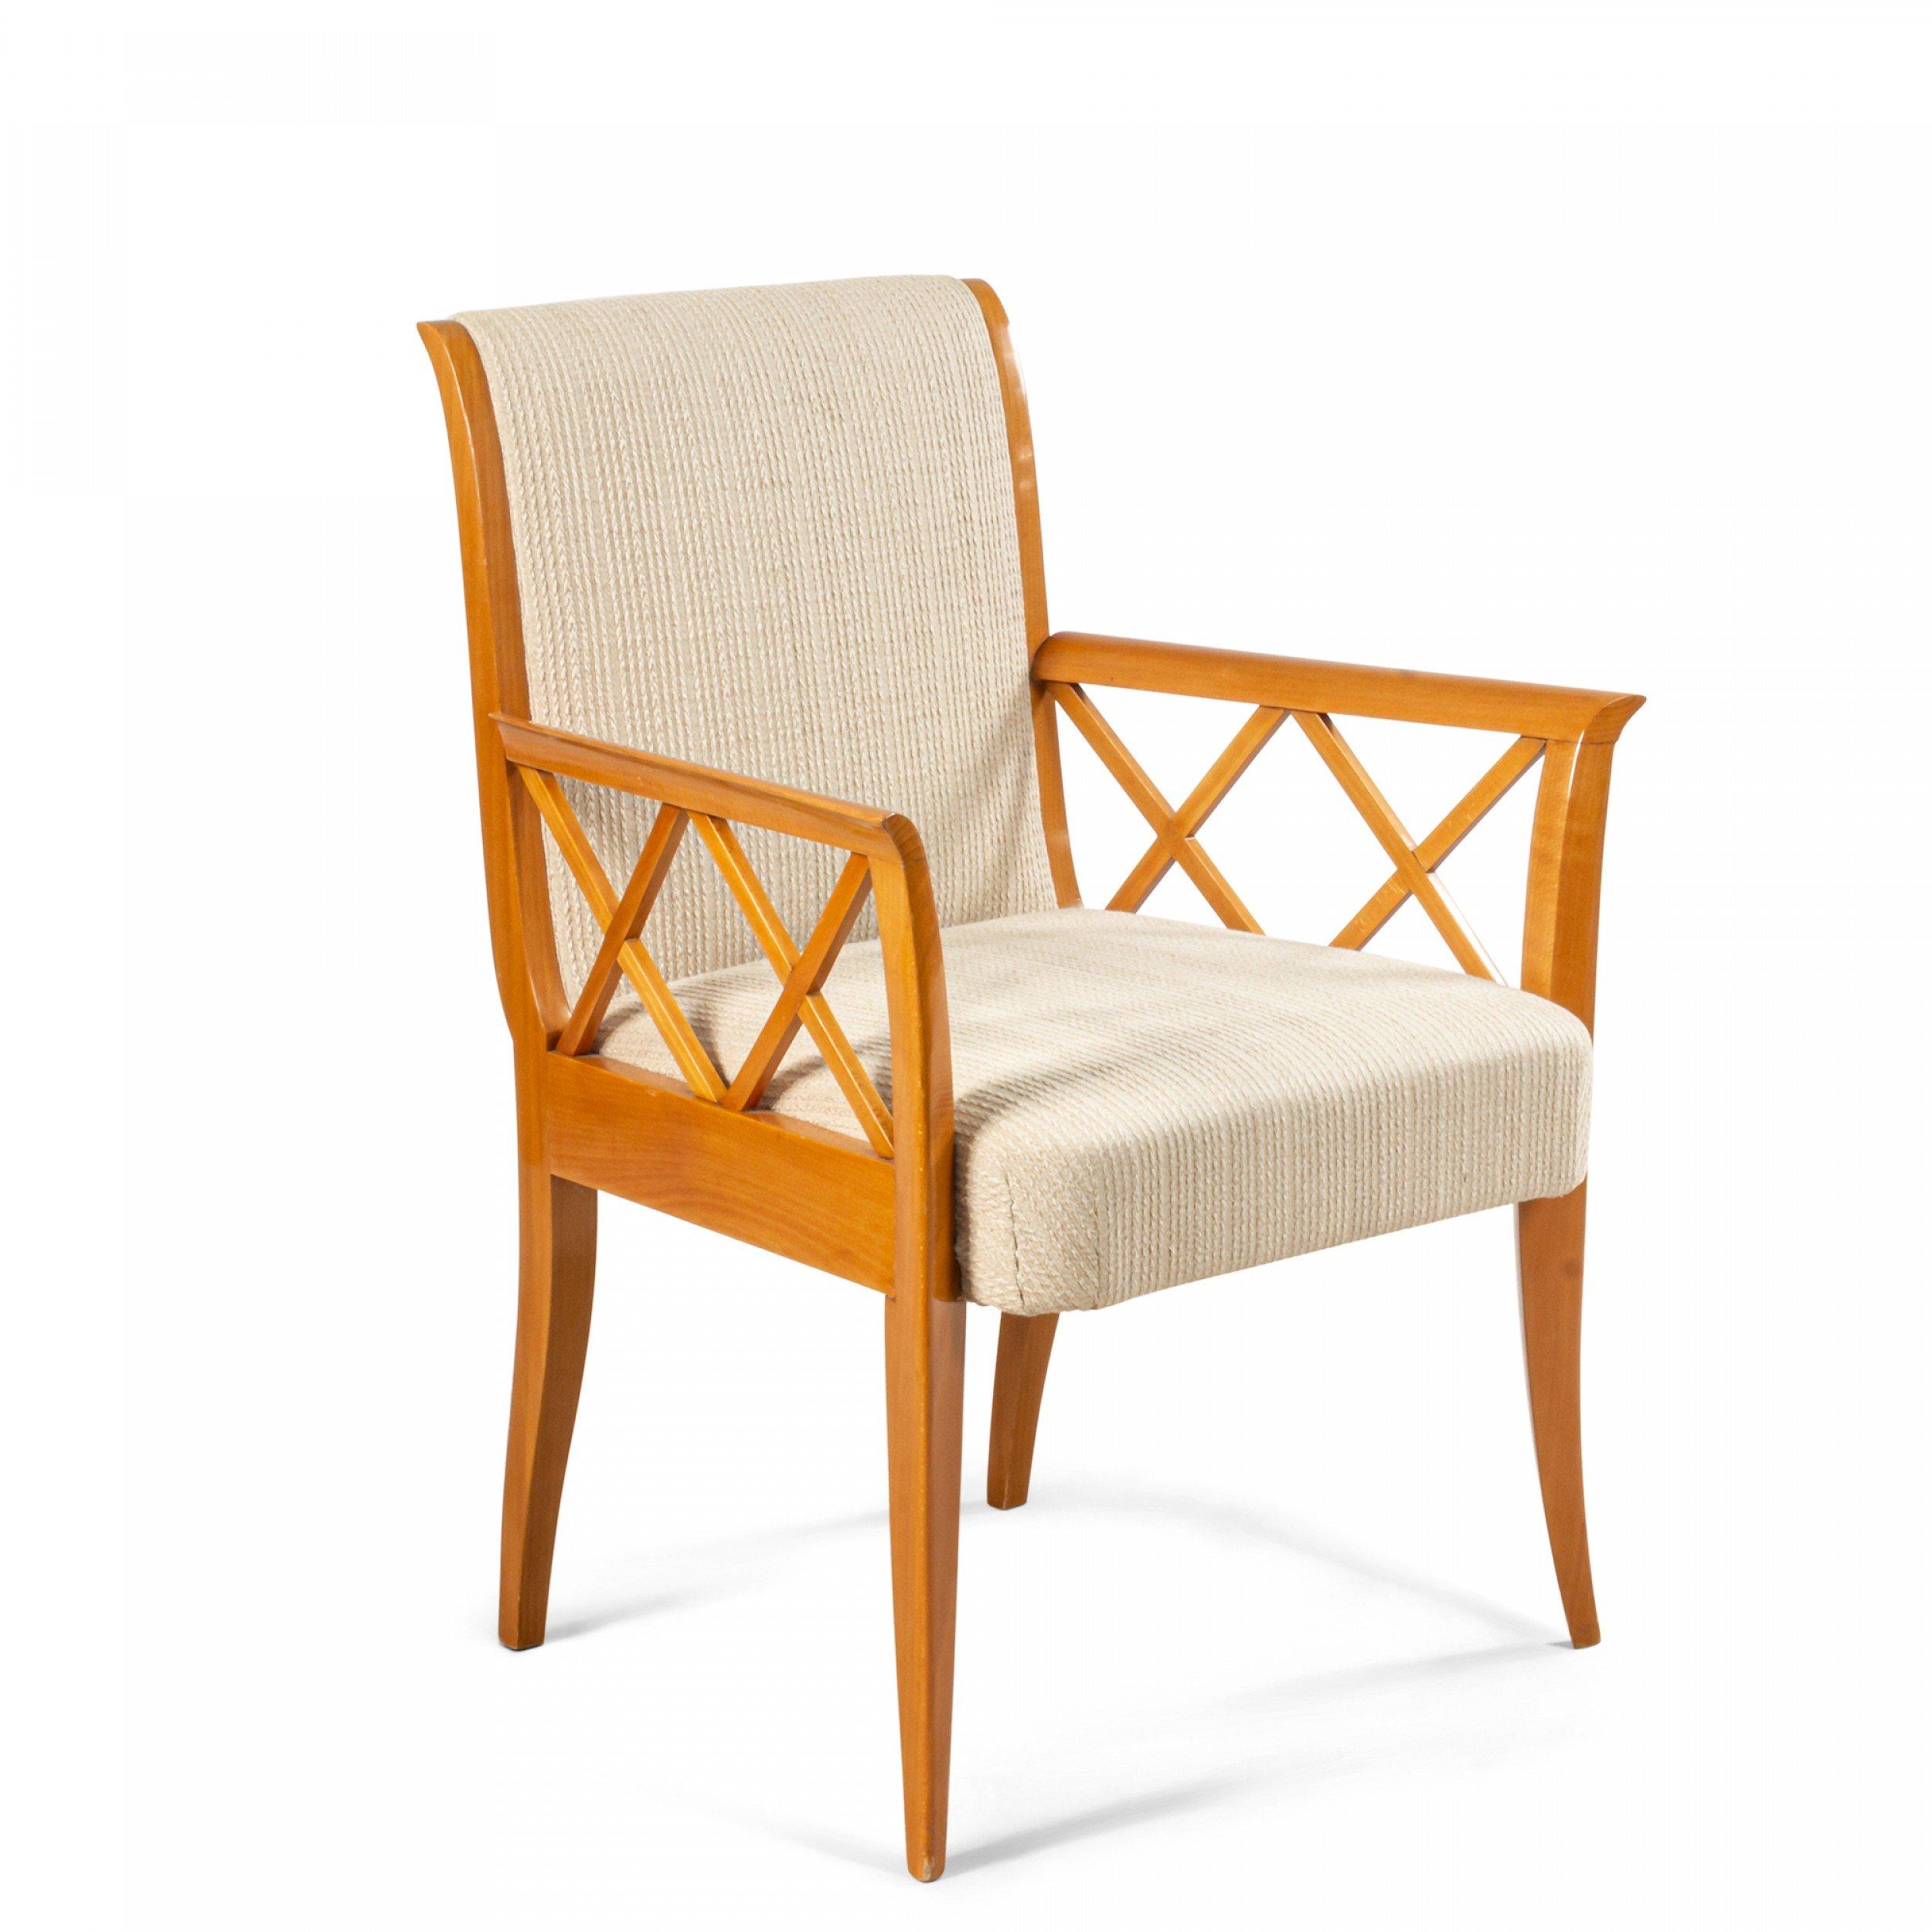 Set of 4 French Maple Lattice Arm Chairs In Good Condition For Sale In New York, NY